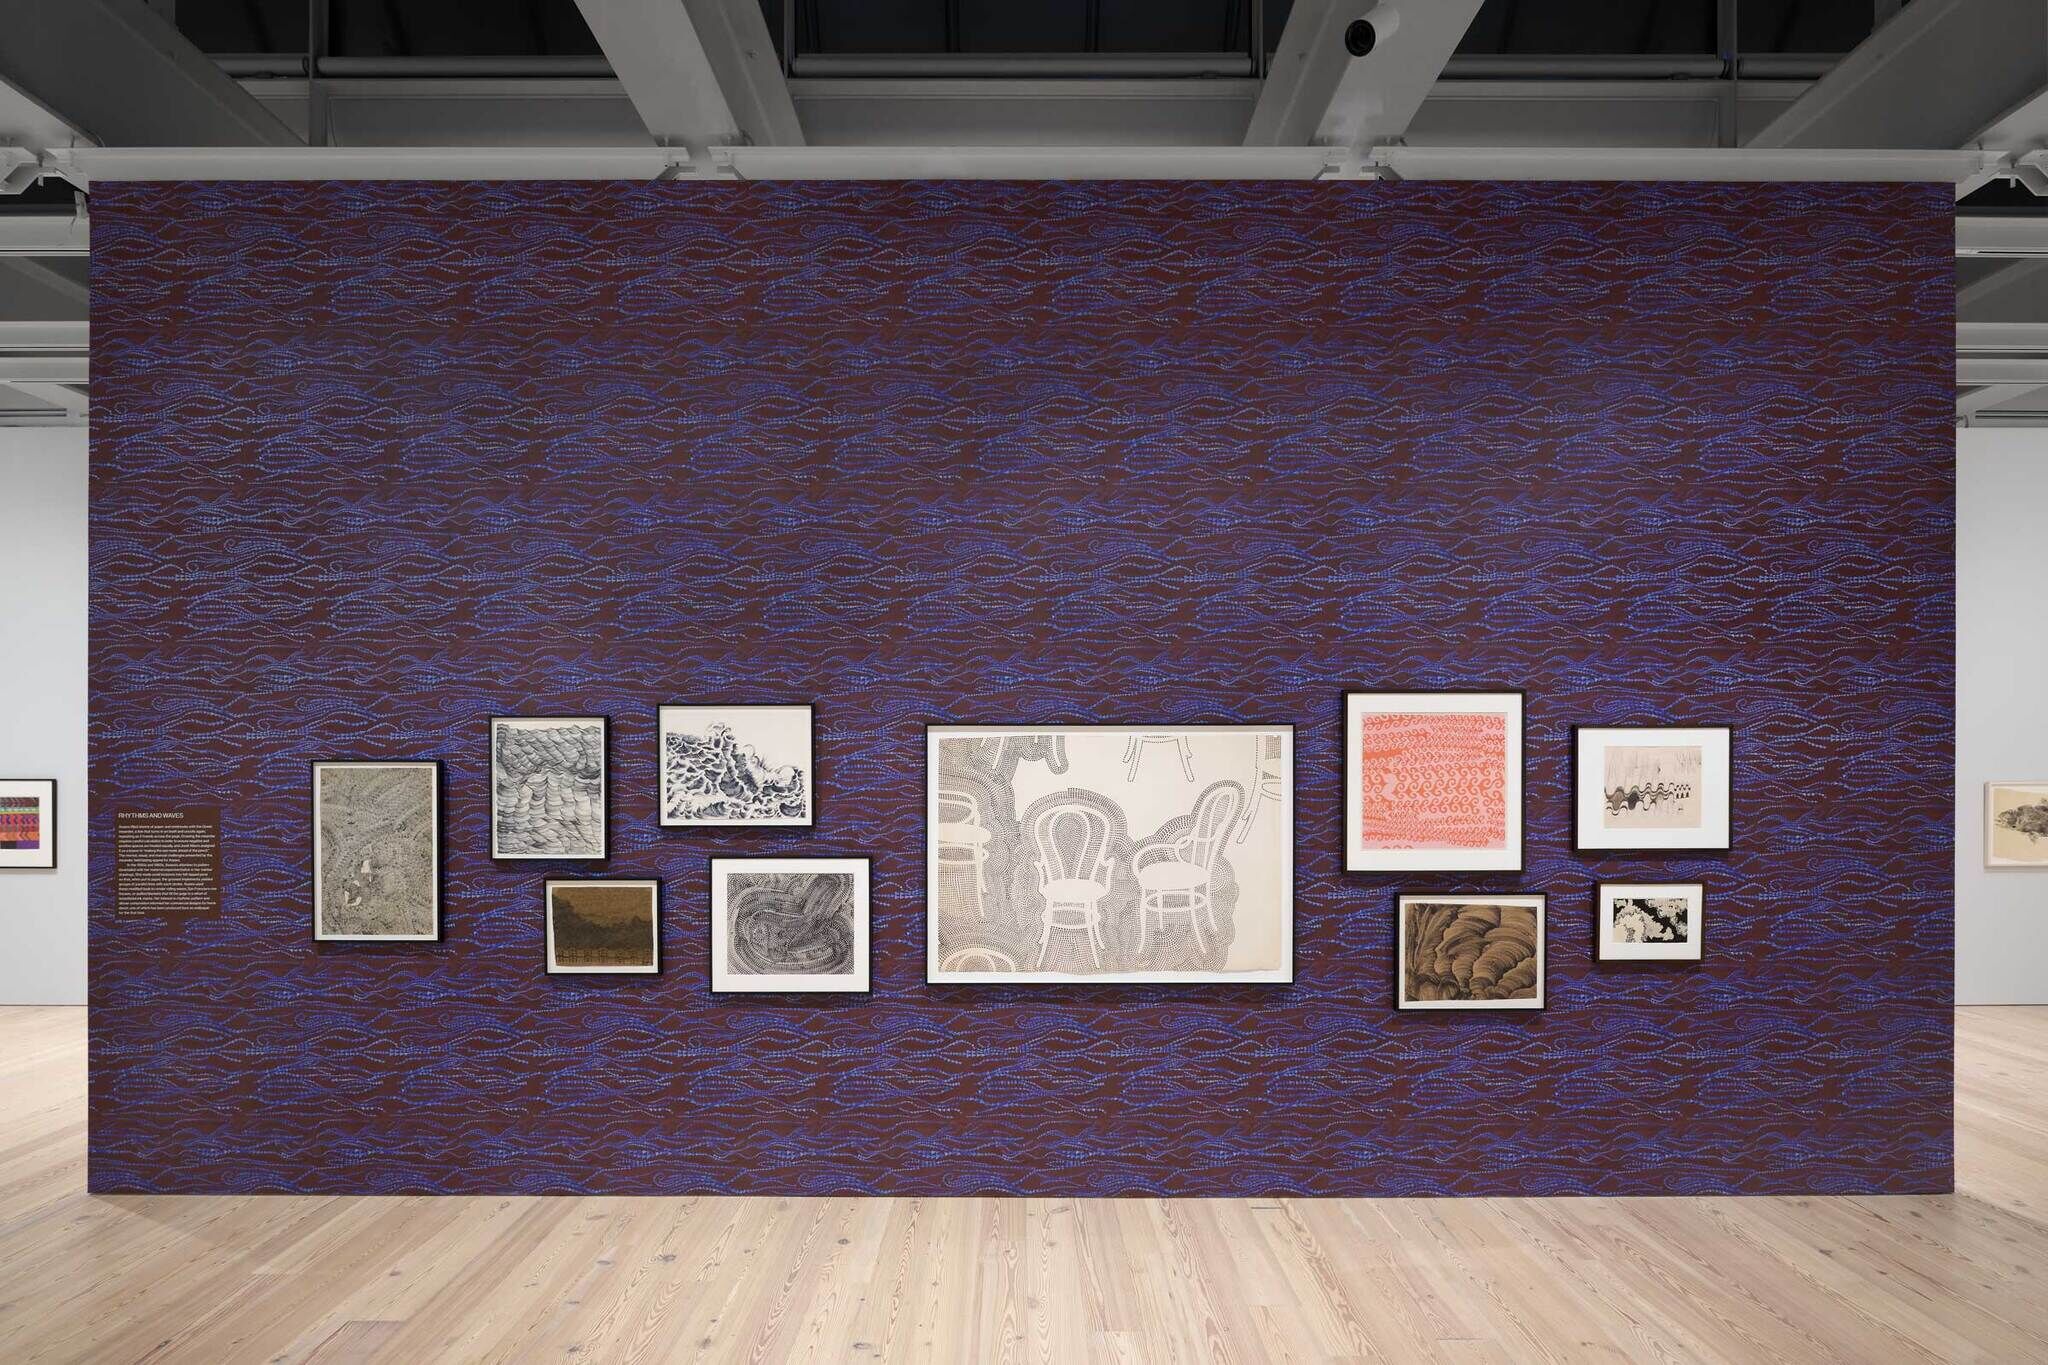 A wall with a brown and purple background with various framed drawings.